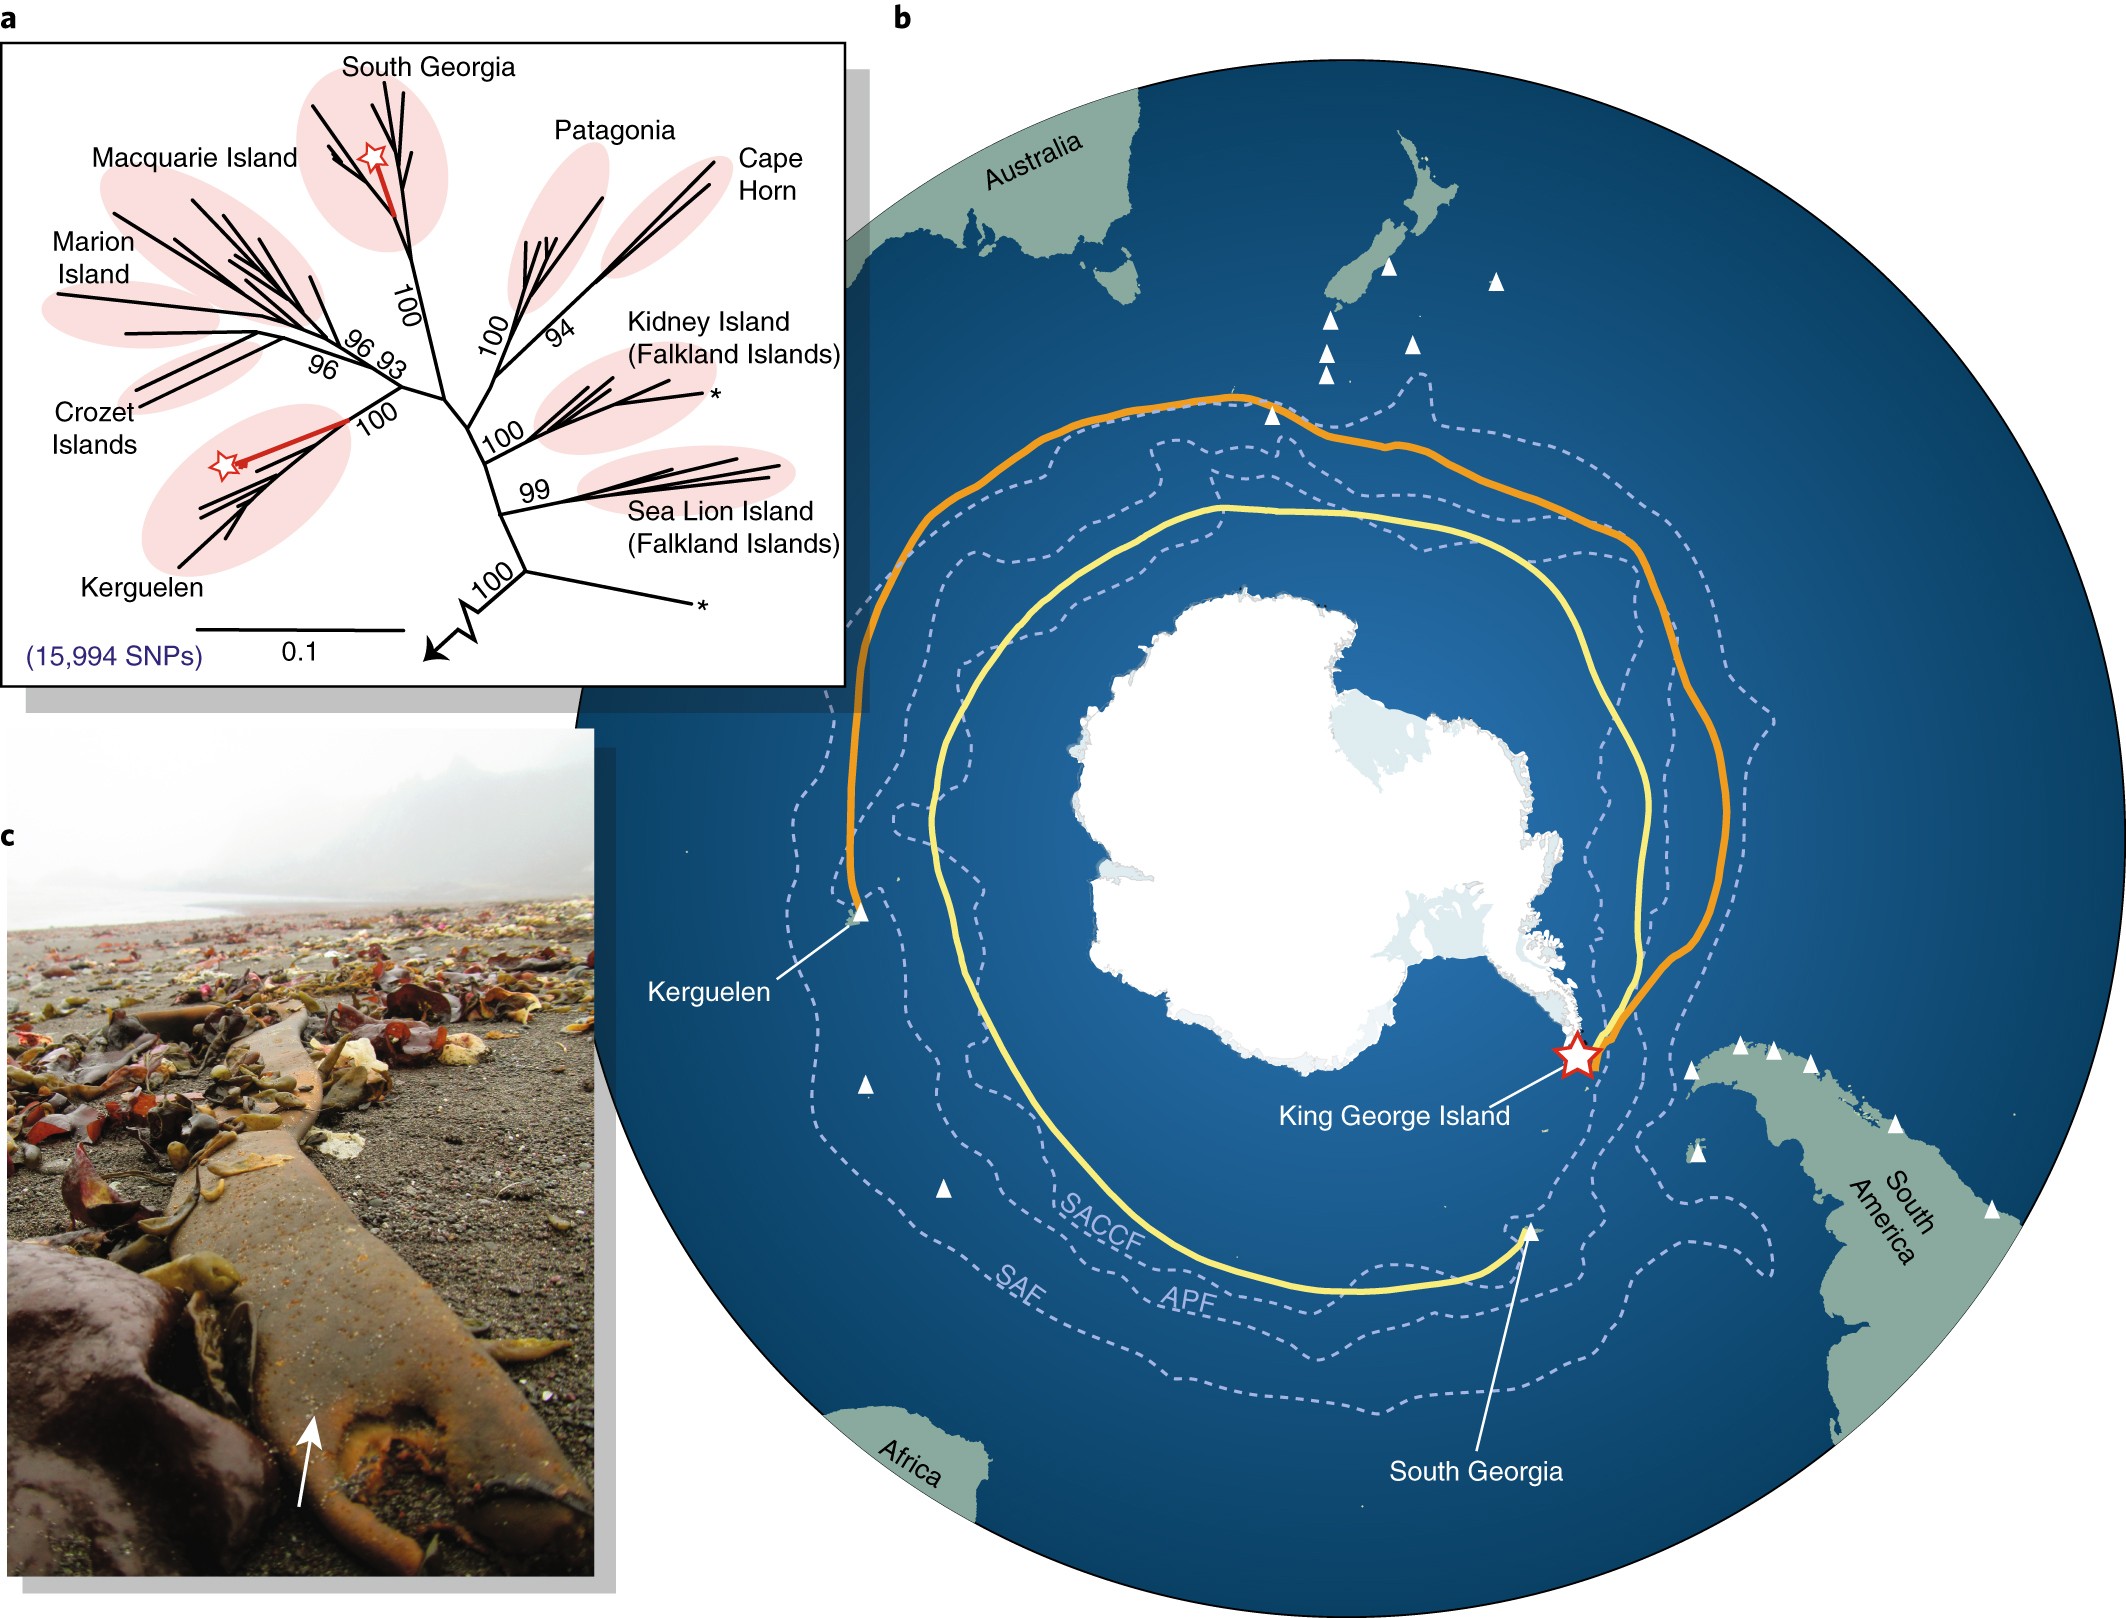 Antarctica's ecological isolation will be broken by storm-driven and warming Climate Change